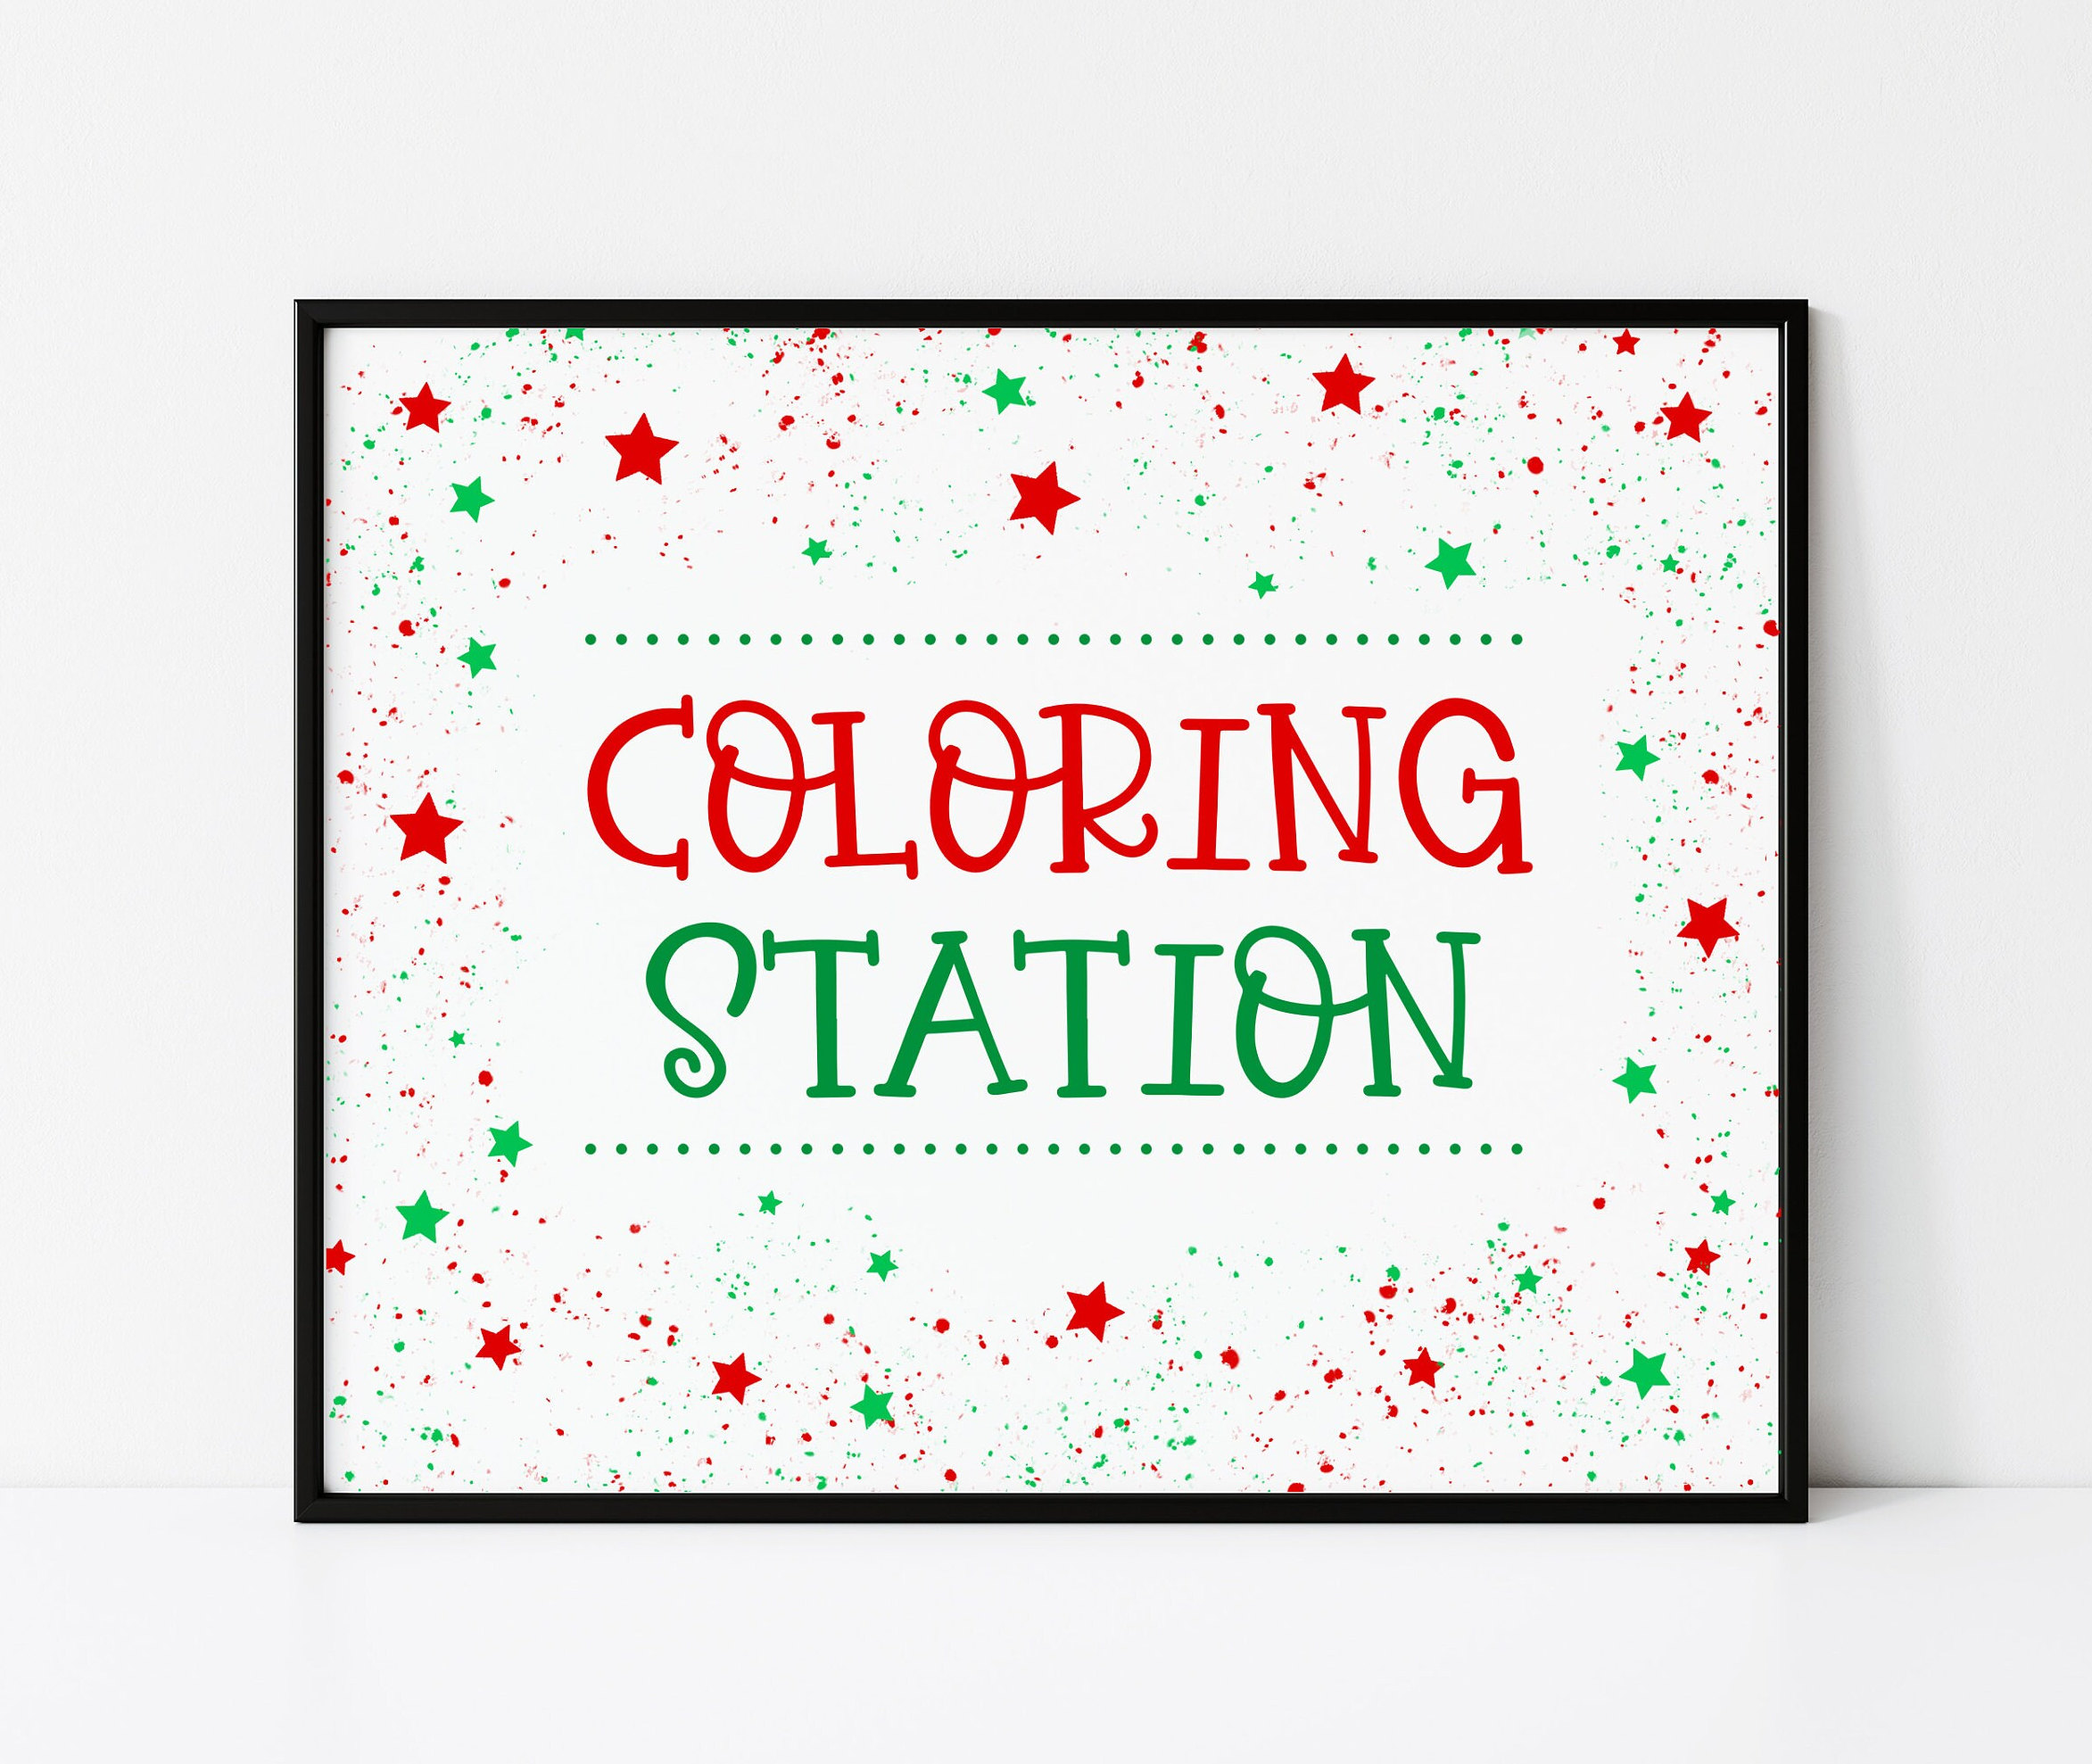 Coloring Station Sign for Christmas, Kids Birthday Party, Holiday Arts and  Crafts, Activity Table, Party Decor Printable